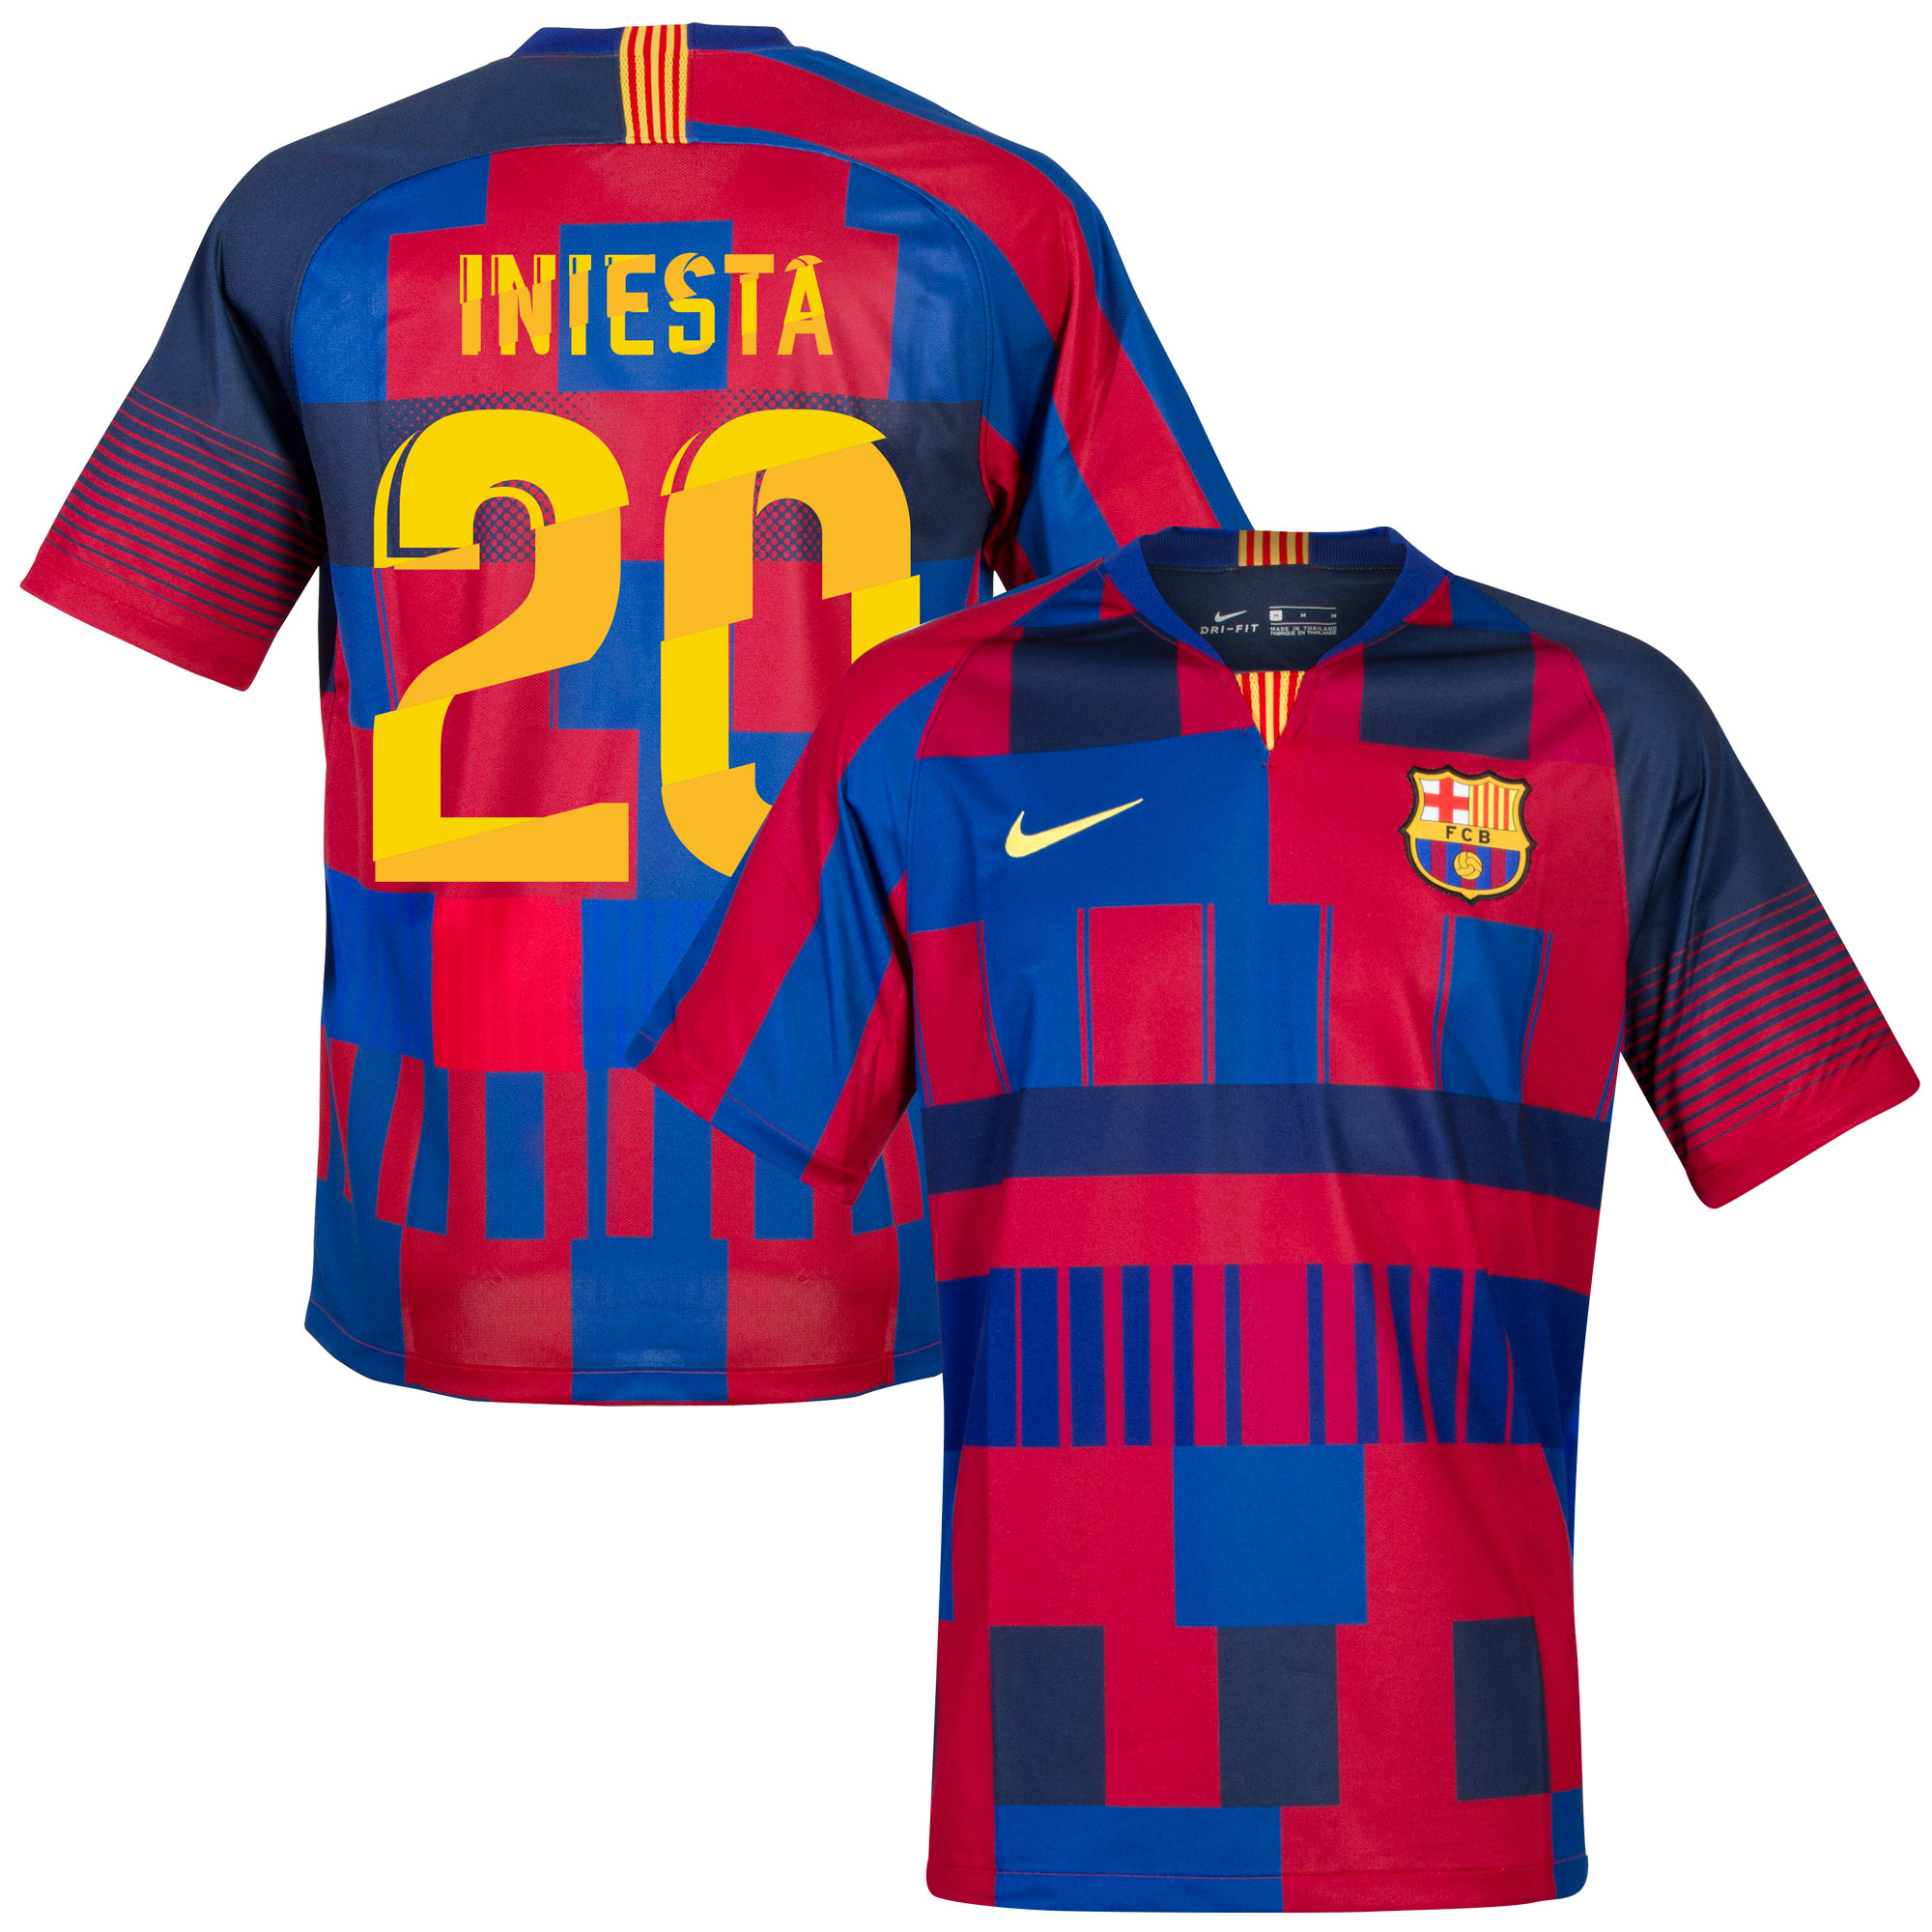 Barcelona x Nike 20th Anniversary Voetbalshirt + Iniesta 20 (Special Edition Fan Style Printing) S